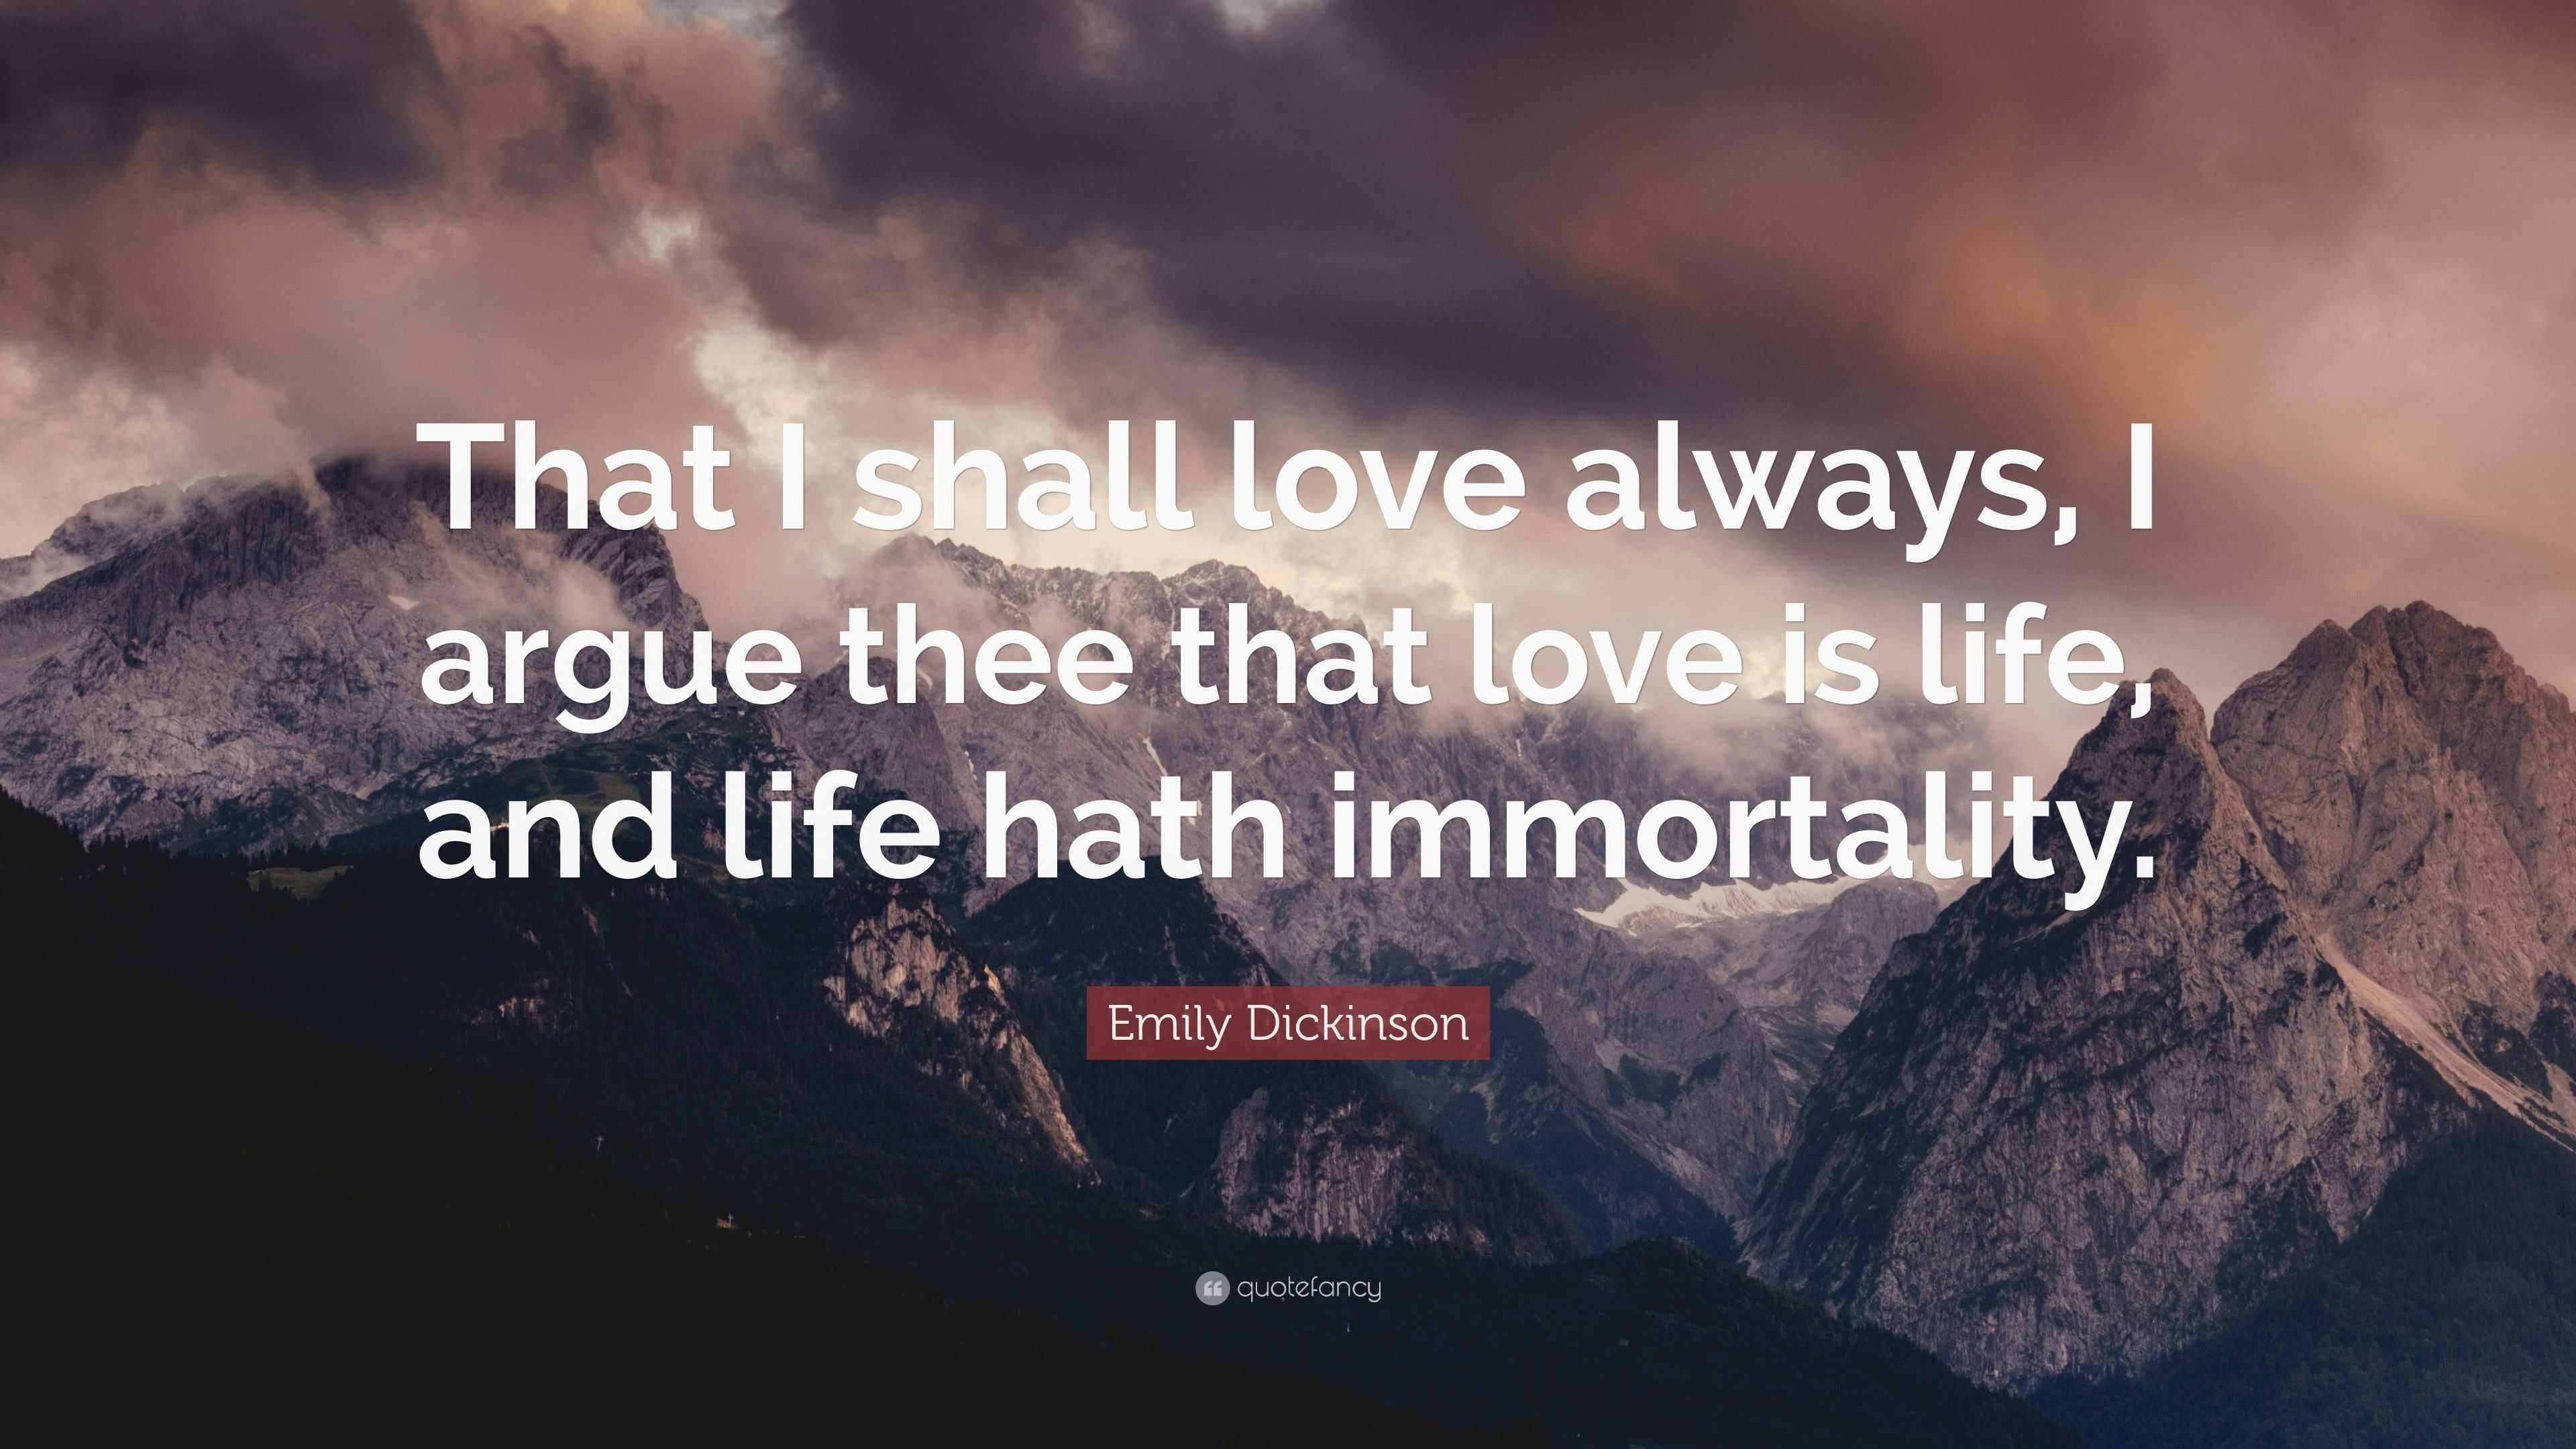 Emily Dickinson Quote: “That I shall love always, I argue thee that ...